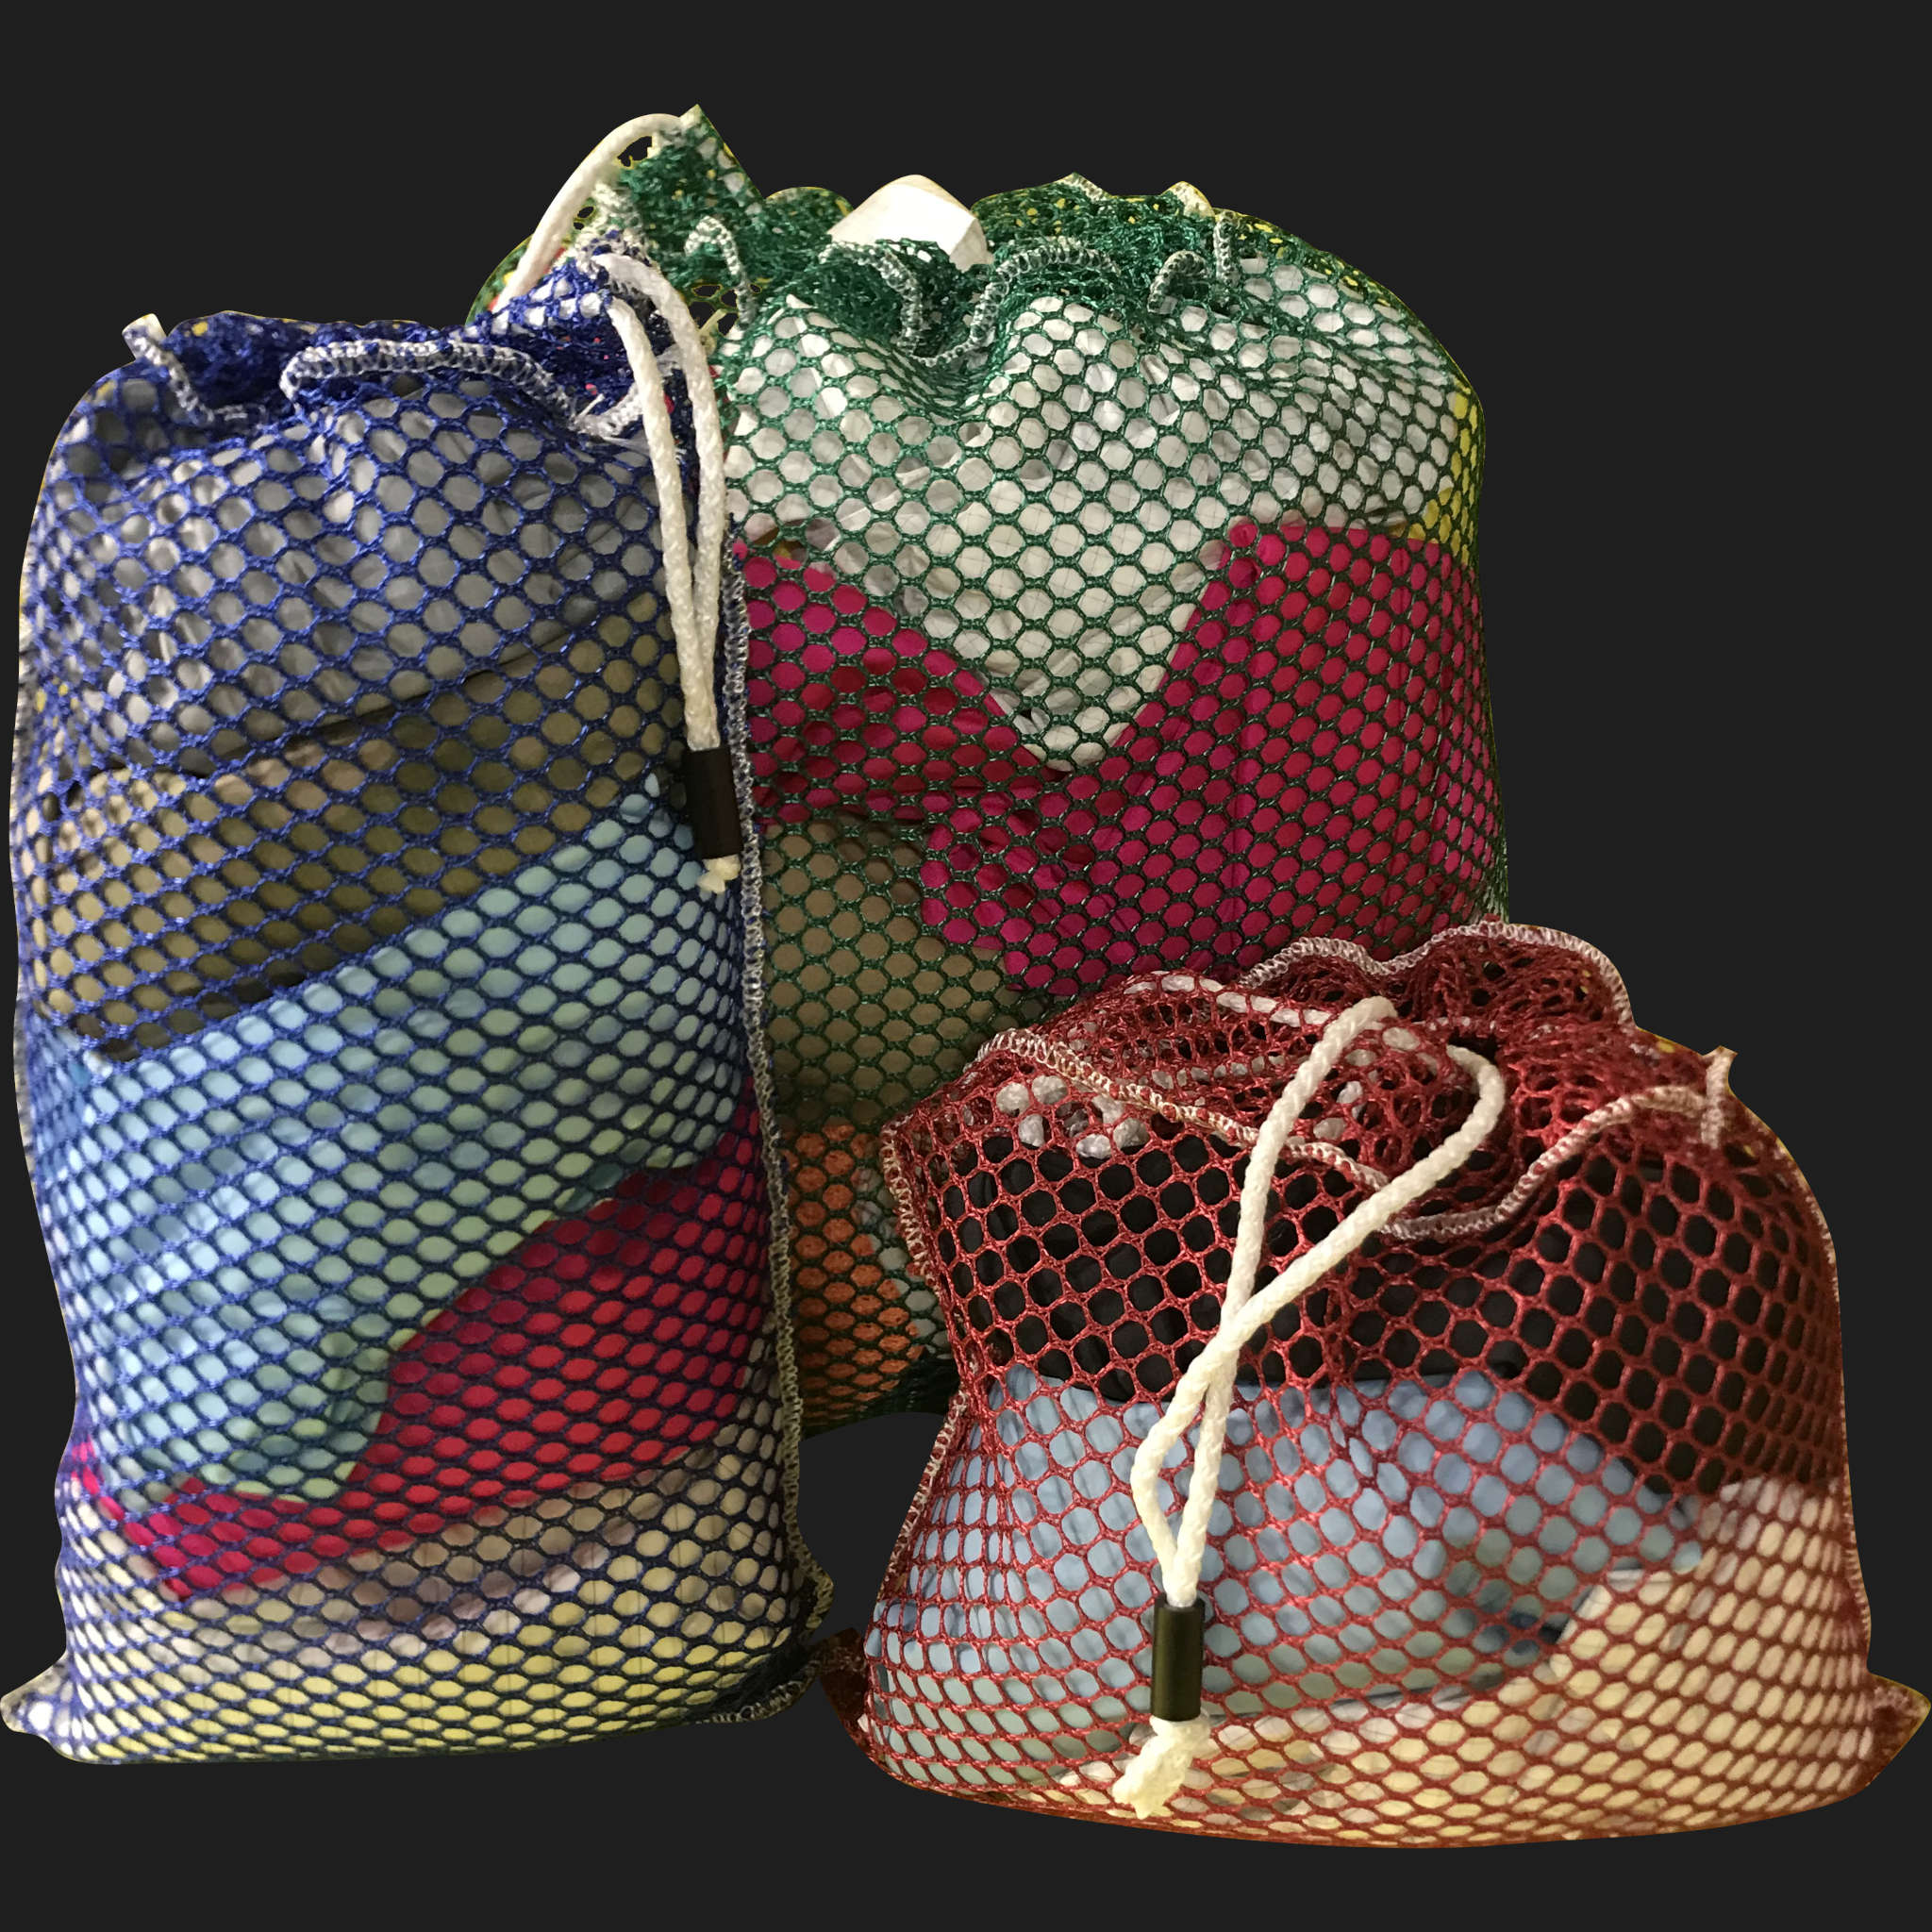 28" x 34" Customized Mesh-Net-Laundry Bags Heavy Duty with Cord and barrellock closure